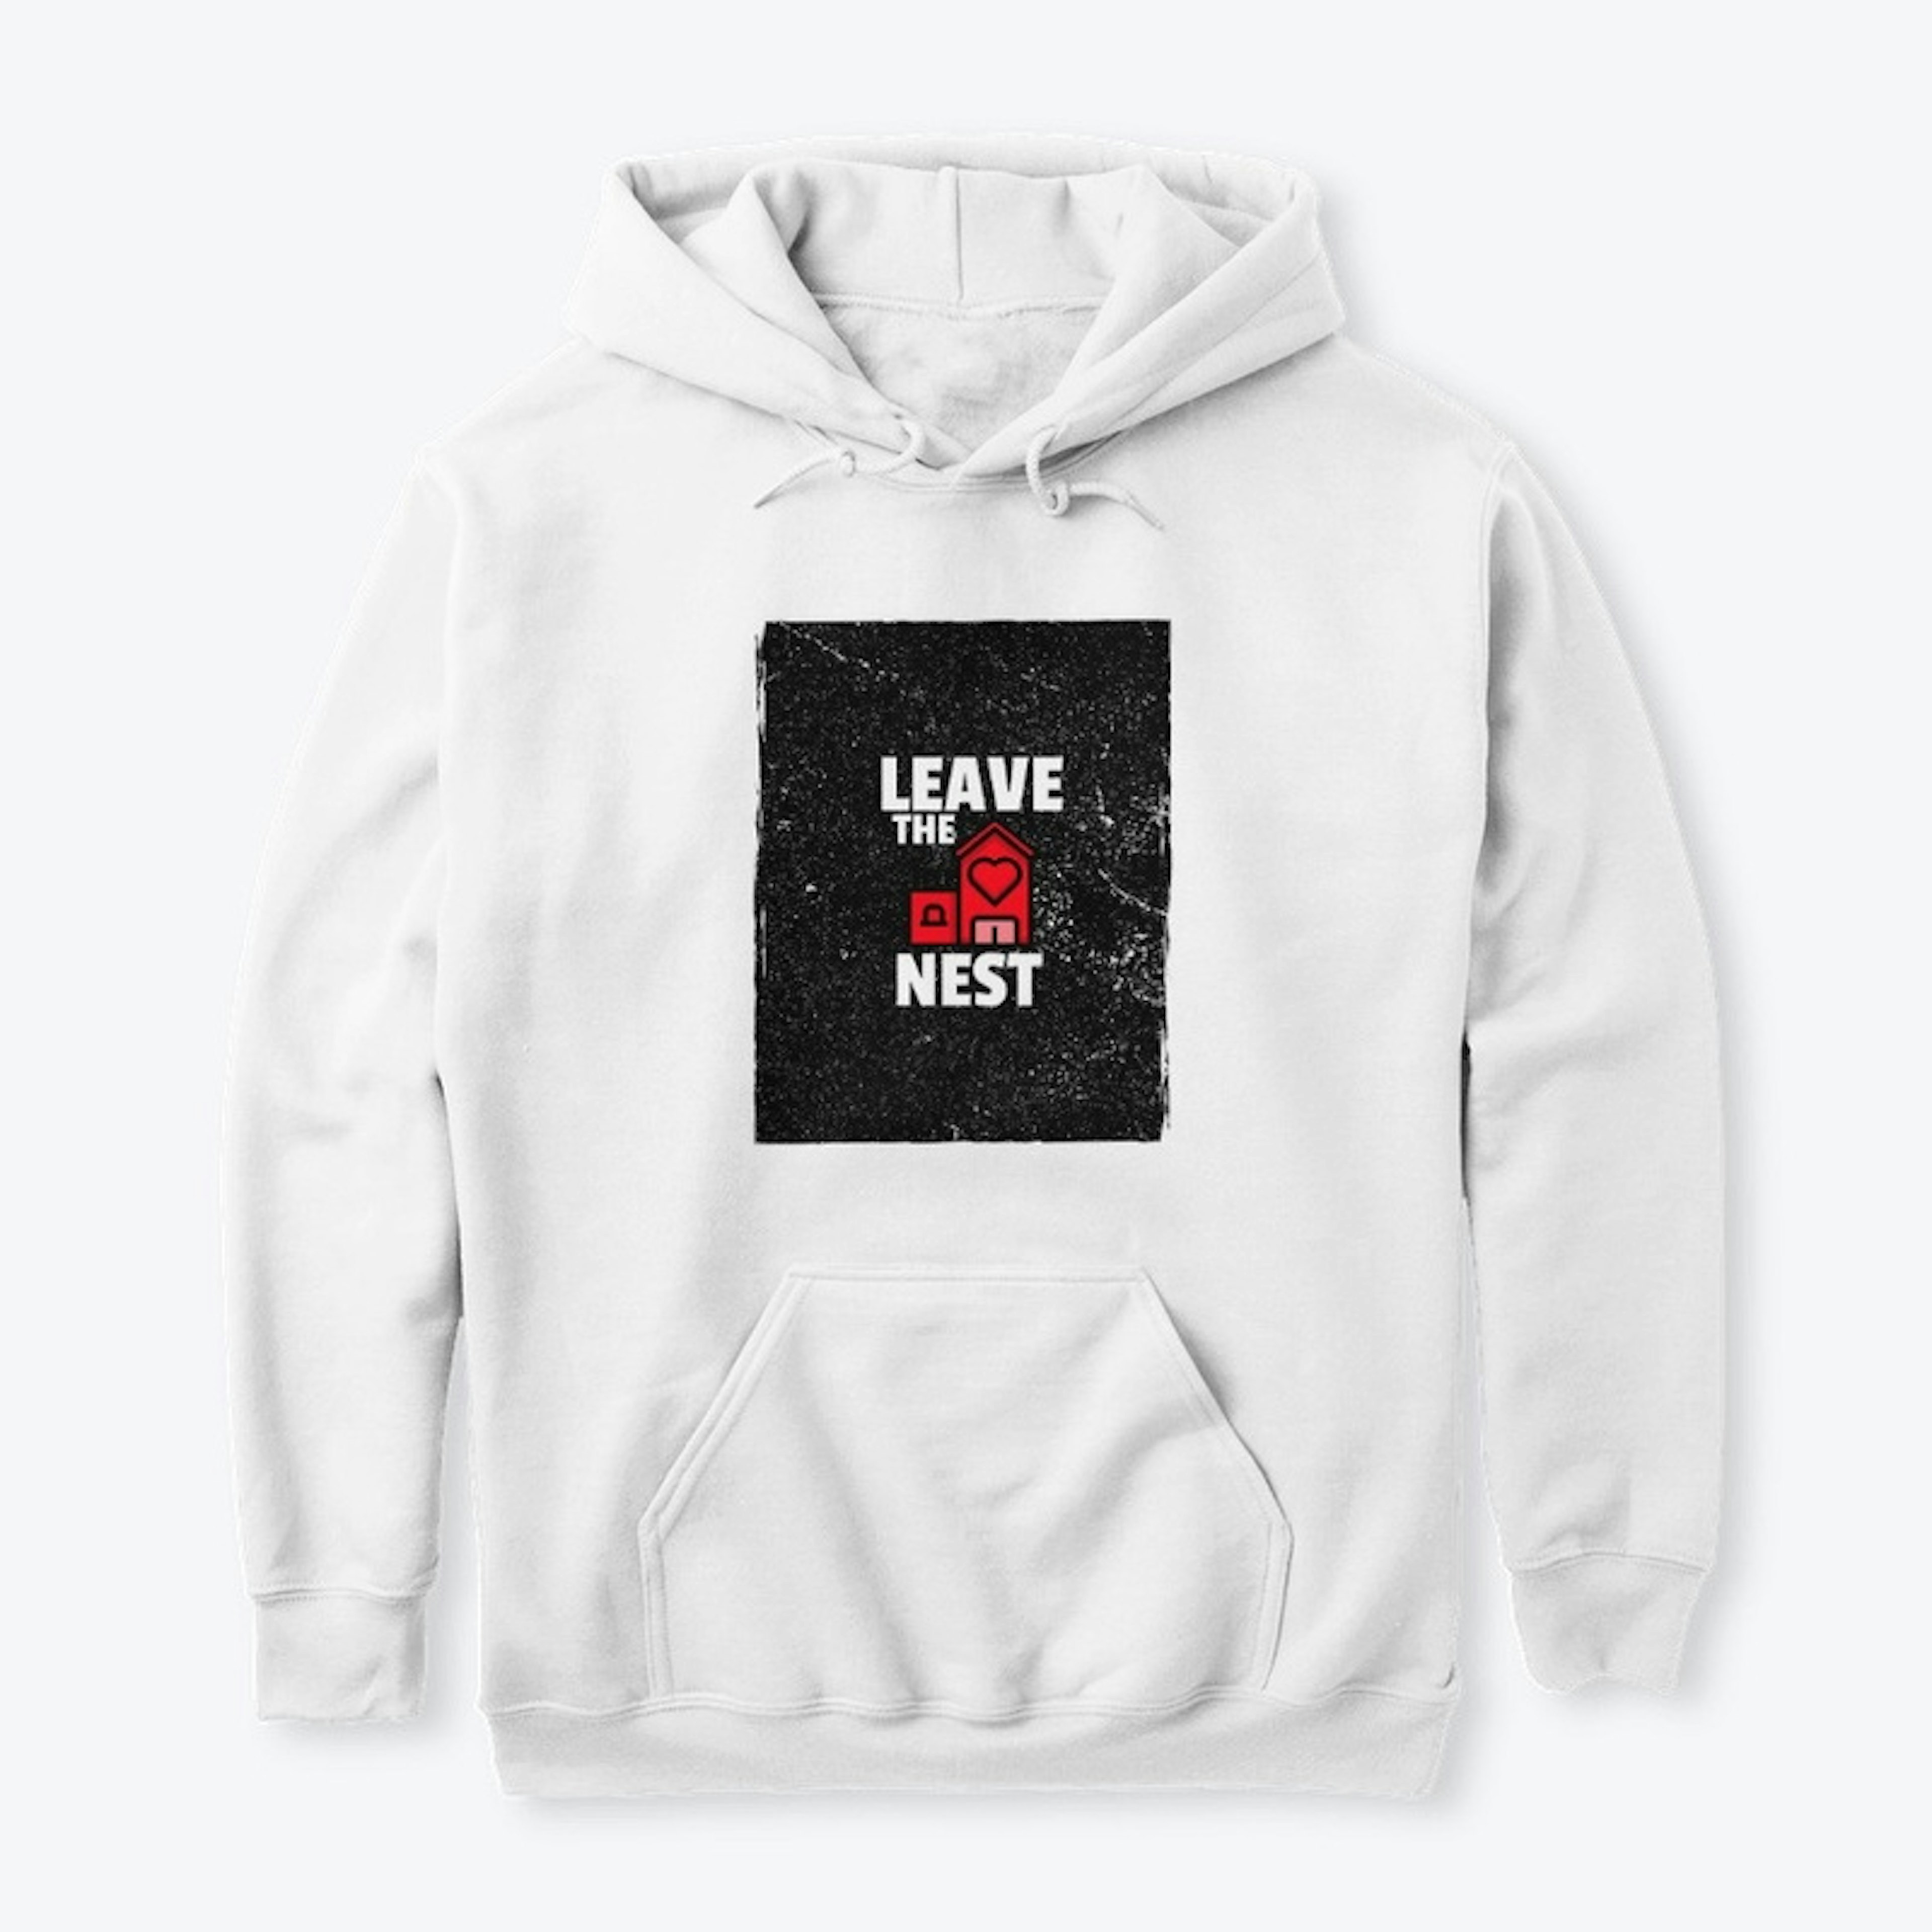 LEAVE THE NEST